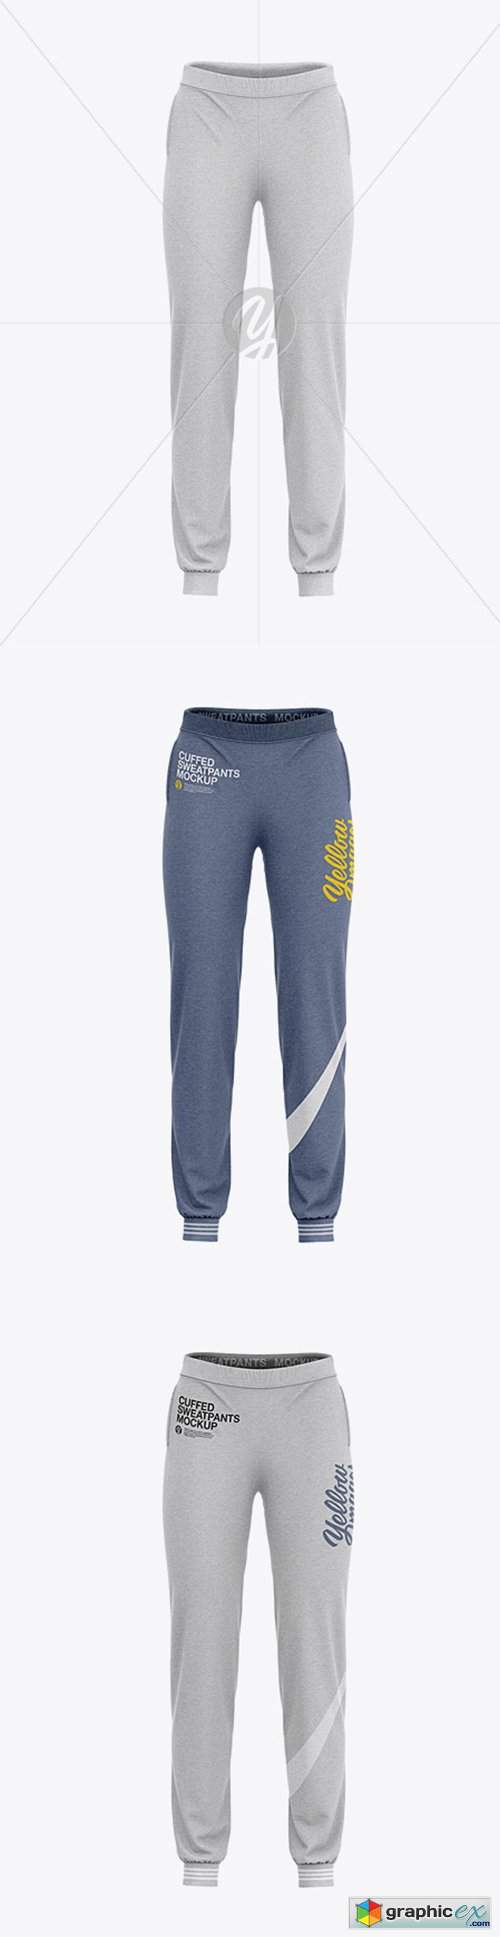 Women's Heather Cuffed Joggers - Front View